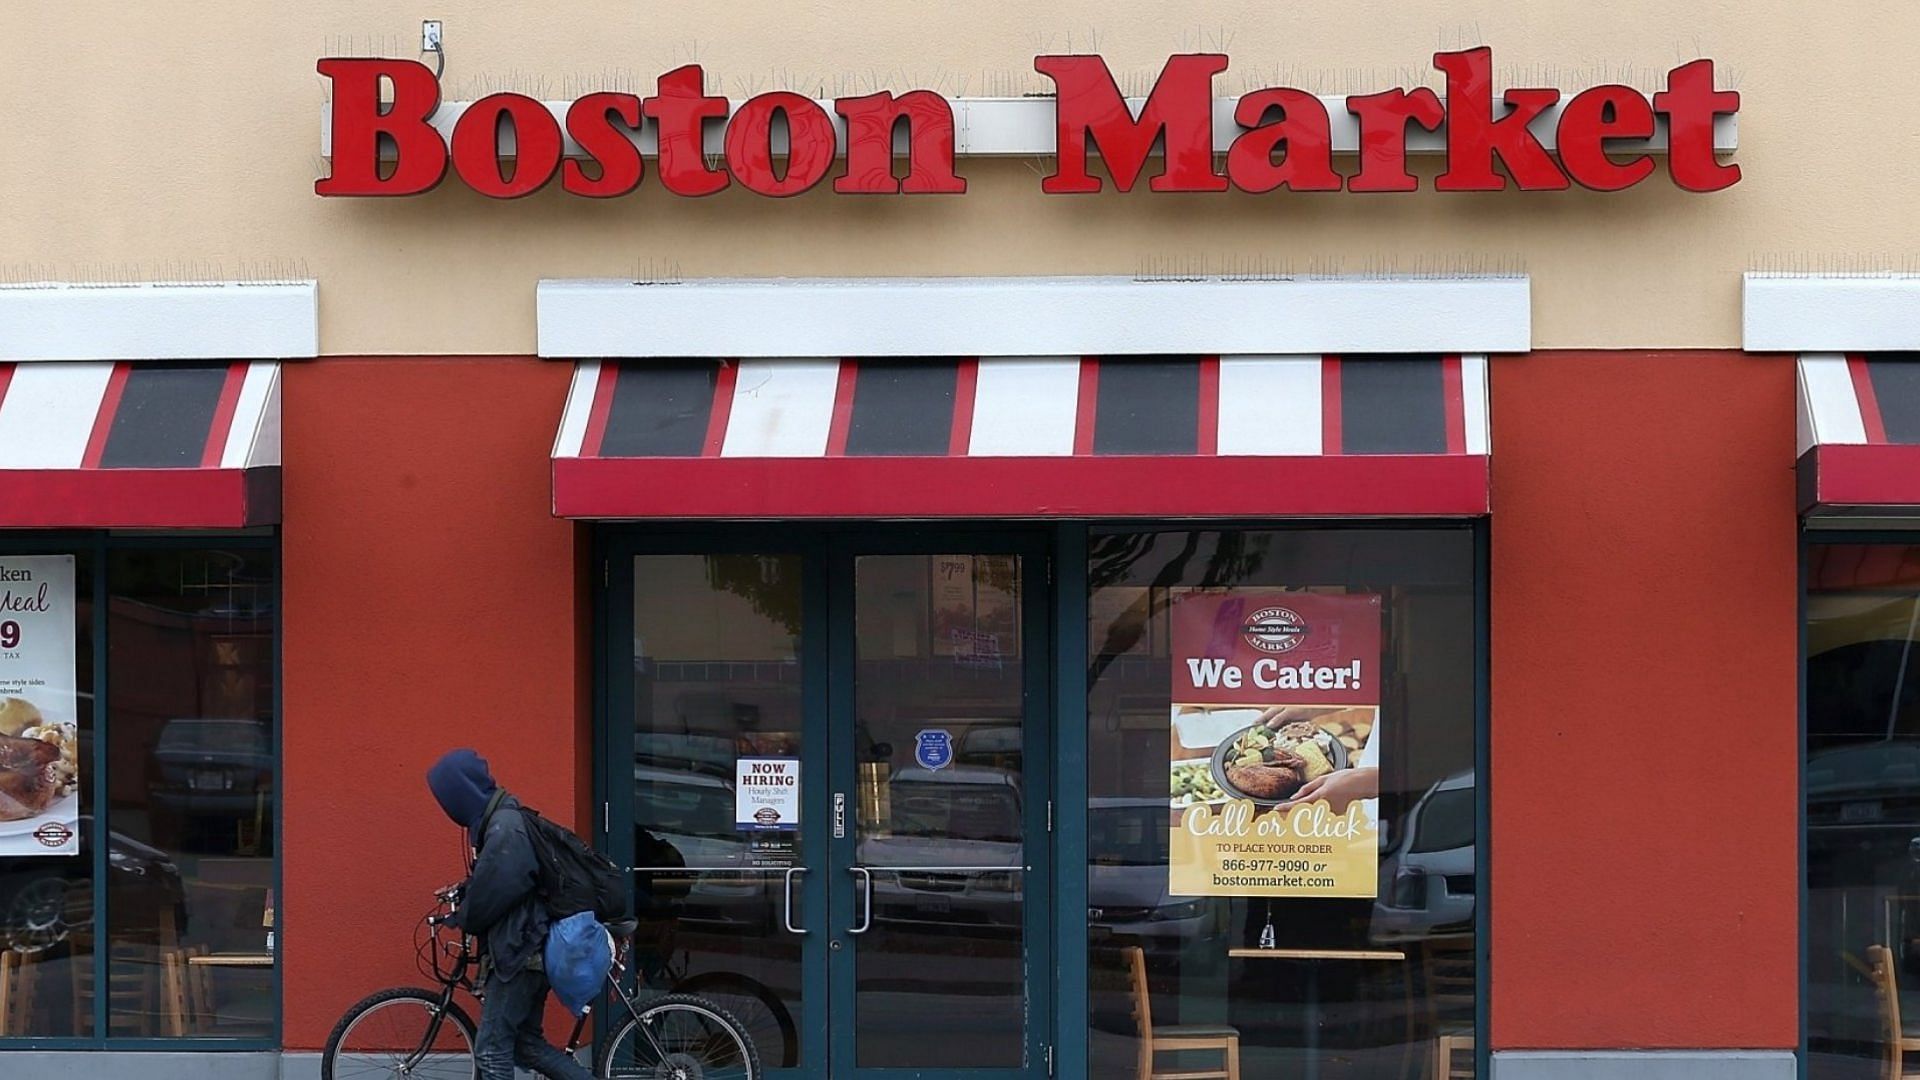 Boston Market launches a new Holiday menu (Image via Olivier Douliery/AFP/GettyImages)